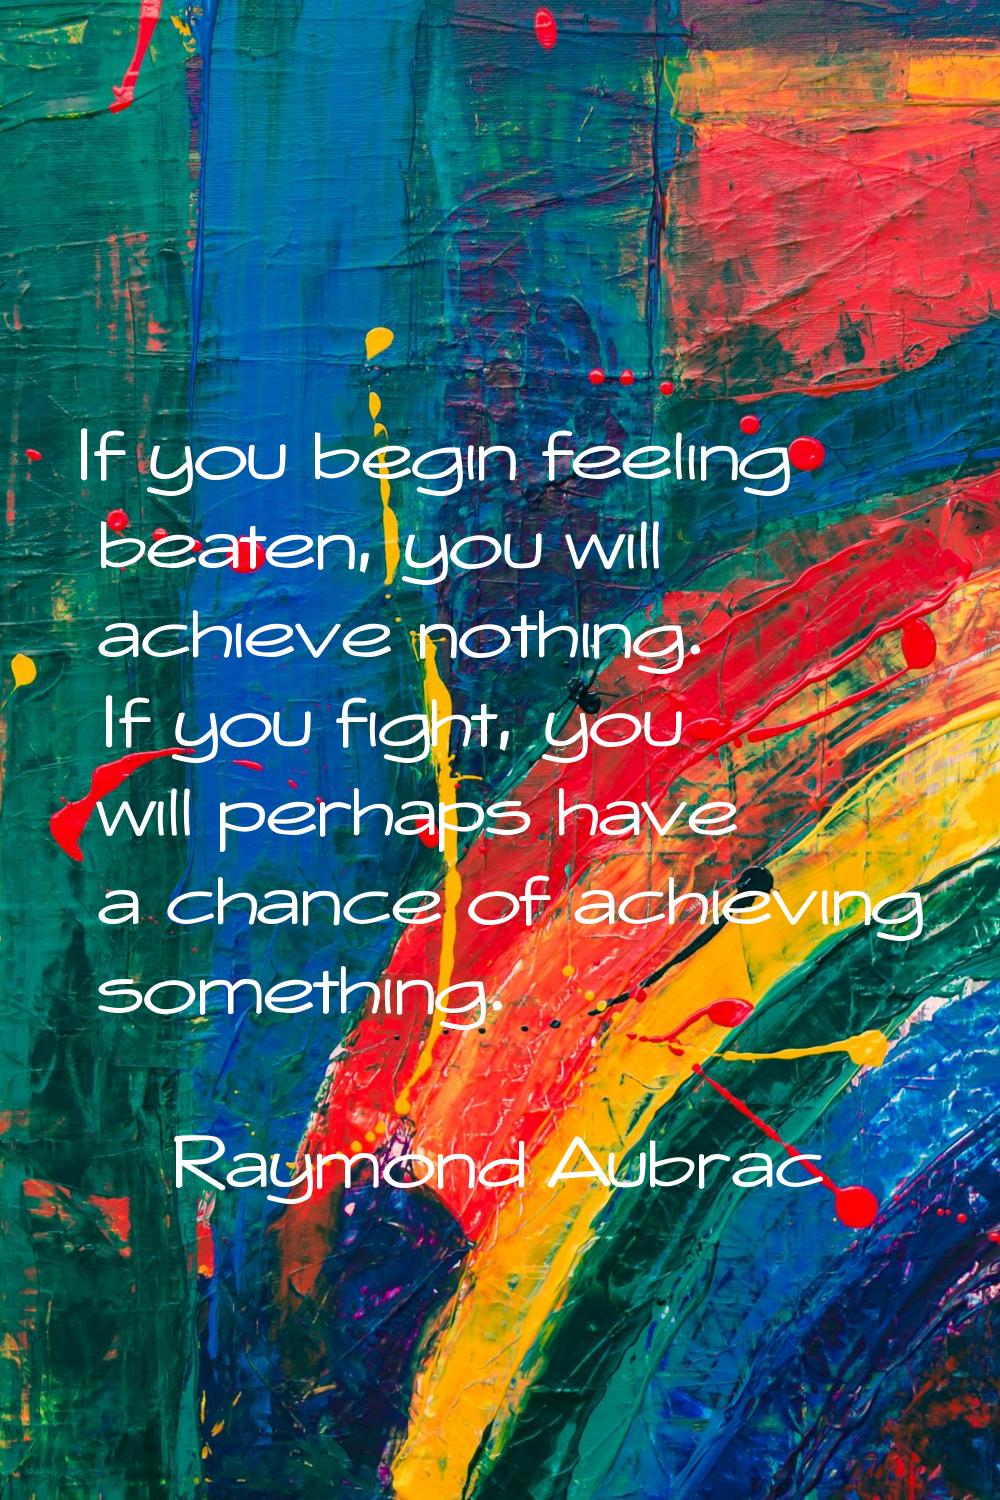 If you begin feeling beaten, you will achieve nothing. If you fight, you will perhaps have a chance